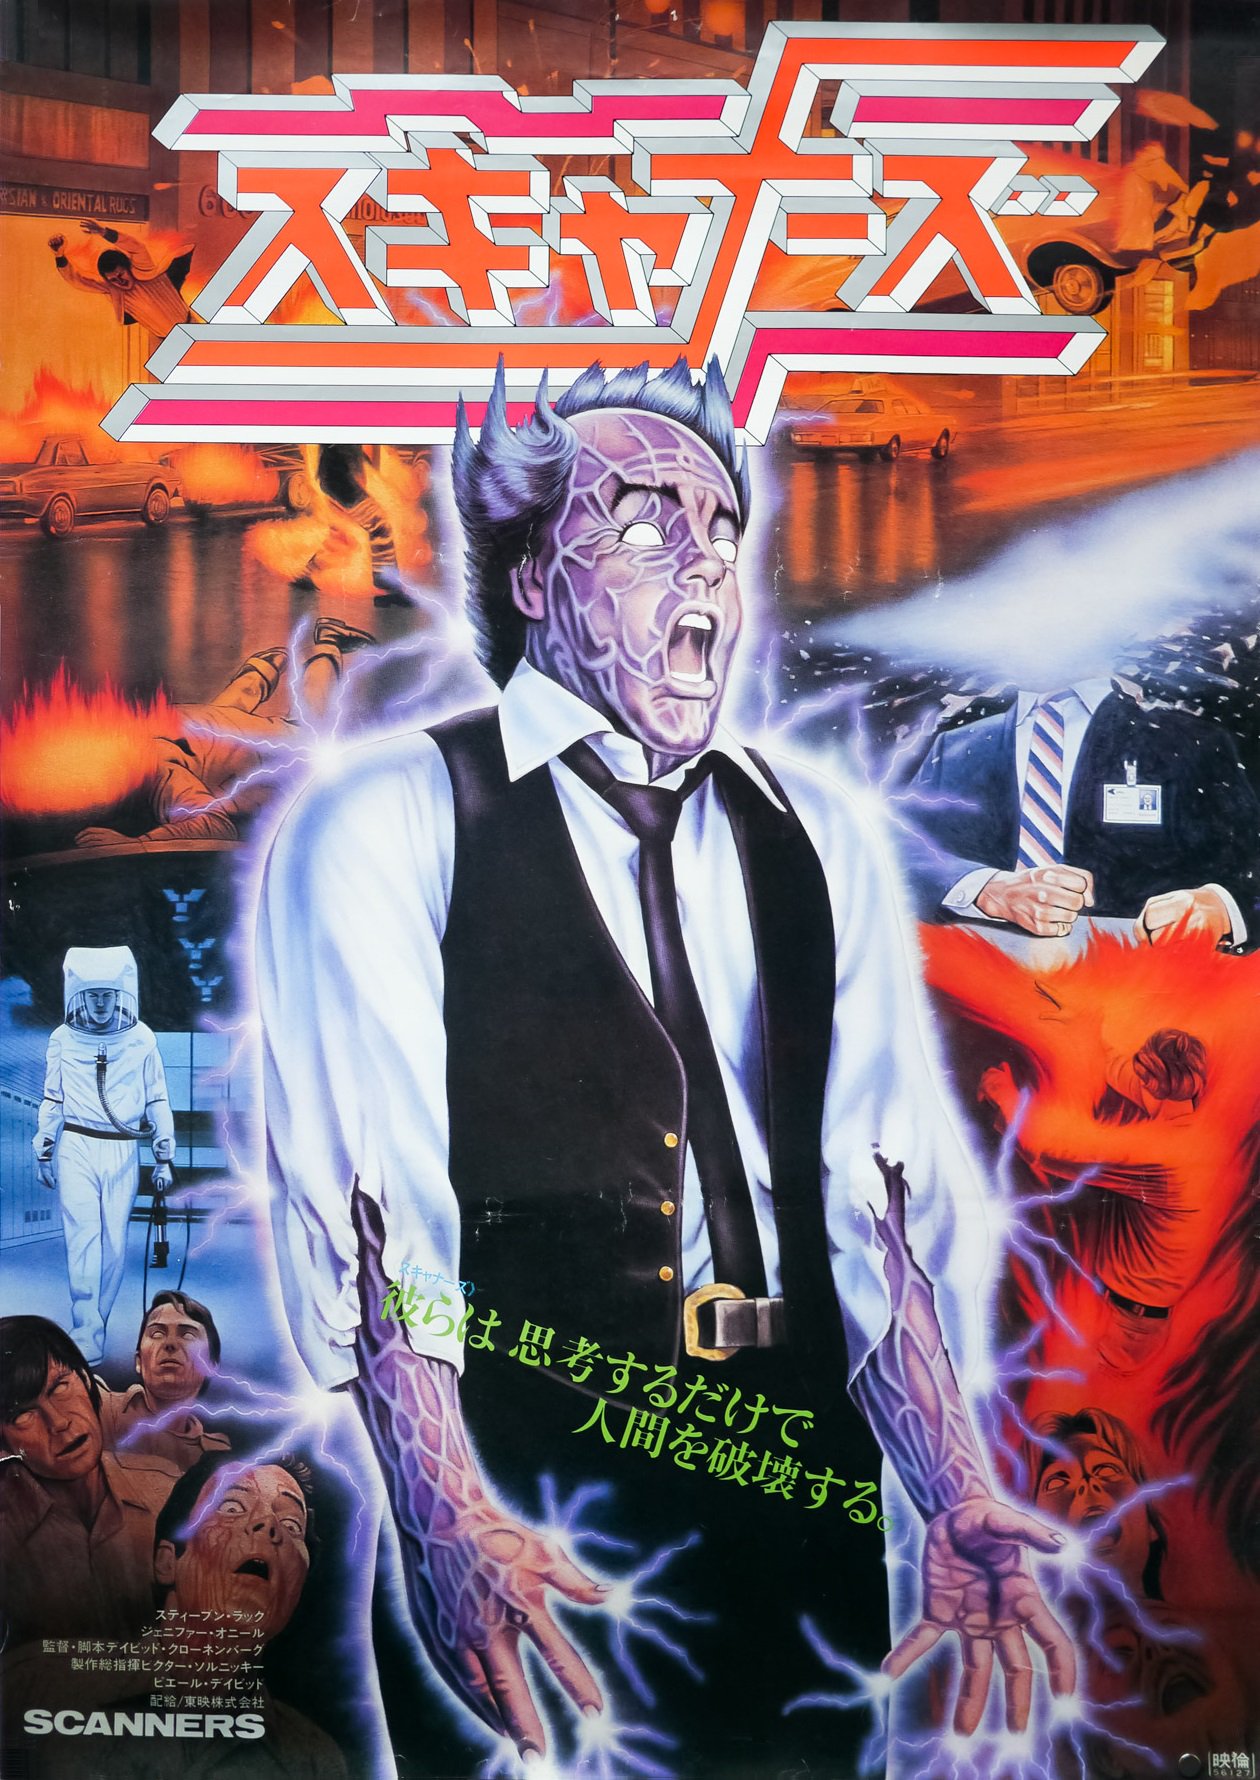 Happy birthday to David Cronenberg - SCANNERS - 1981 - Japanese release poster 